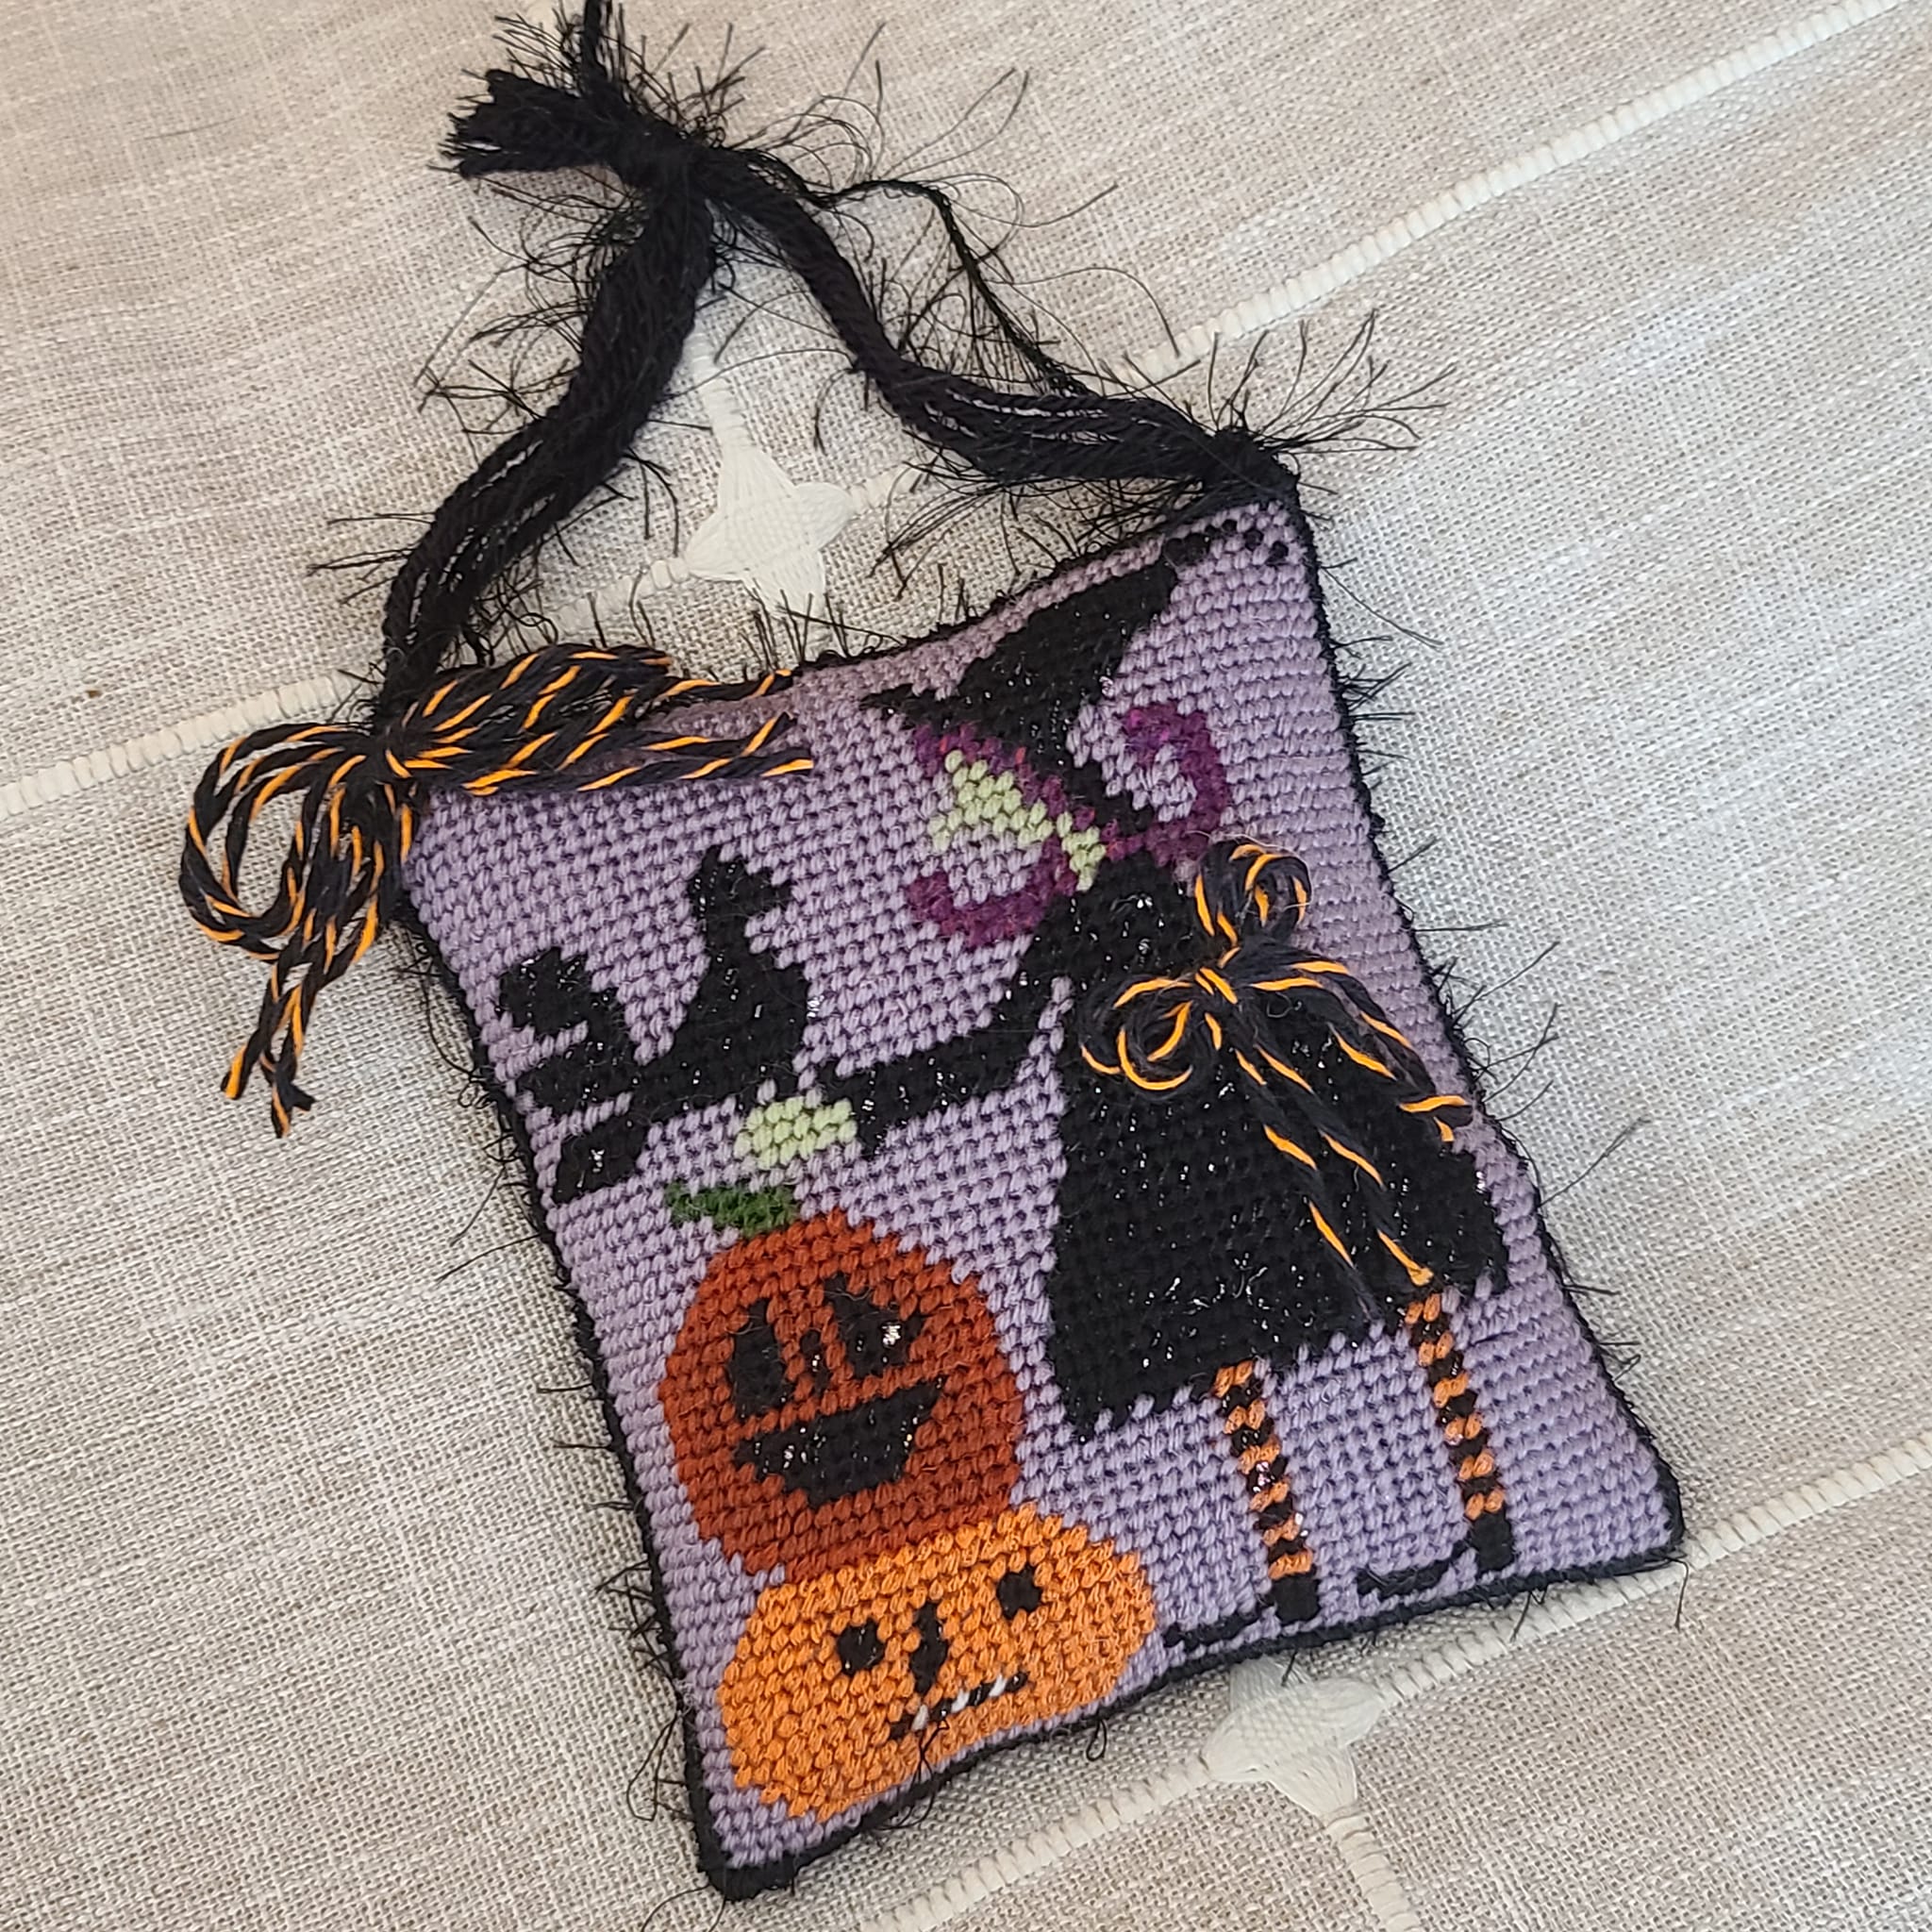 Halloween finished needlepoint witch with crow and pumpkins